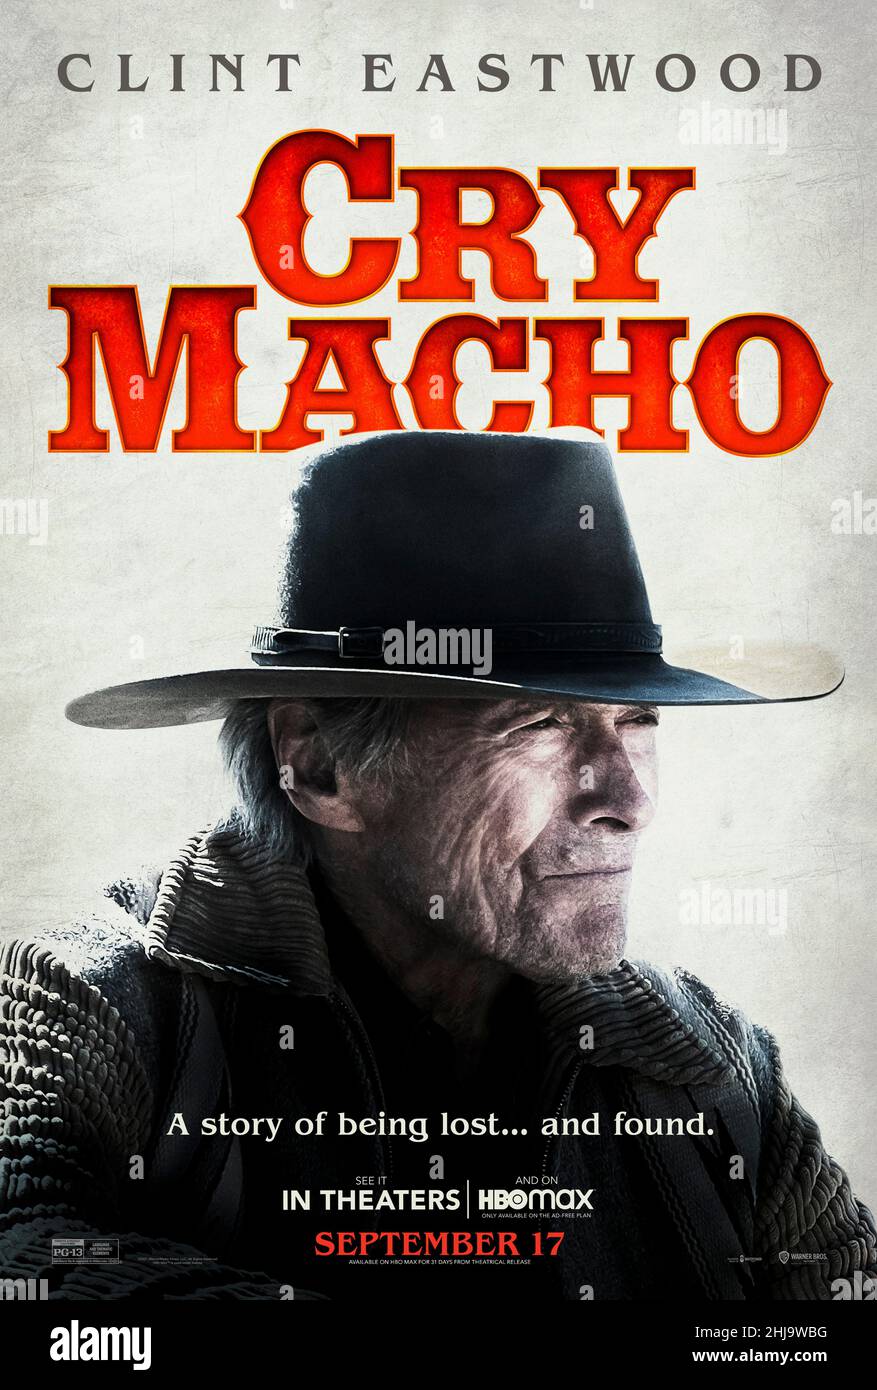 Cry Macho (2021) directed by Clint Eastwood and starring Clint Eastwood, Dwight Yoakam and Daniel V. Graulau. A one-time rodeo star and washed-up horse breeder takes a job to bring a man's young son home and away from his alcoholic mom. On their journey, the horseman finds redemption through teaching the boy what it means to be a good man. Stock Photo